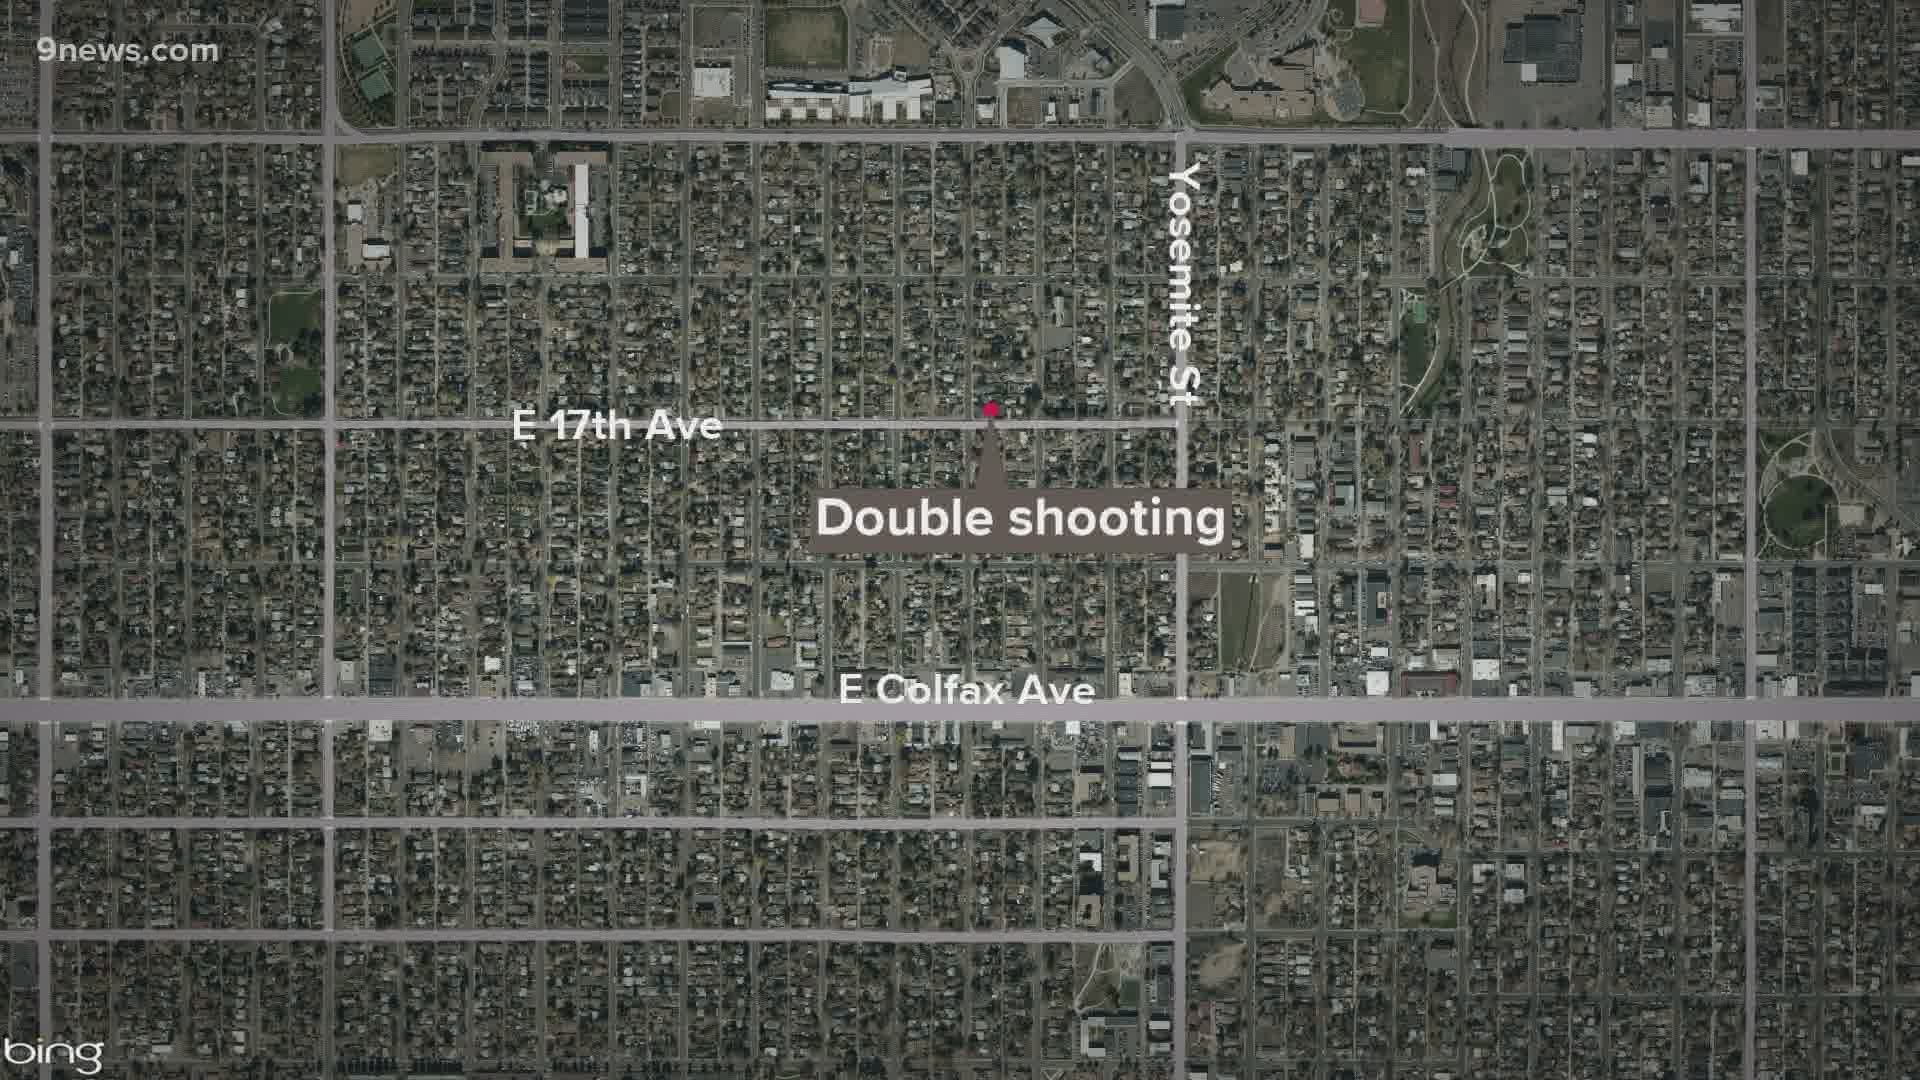 One victim has died and a second is in critical condition after a shooting Wednesday near Montview and Central Park boulevards, according to DPD.